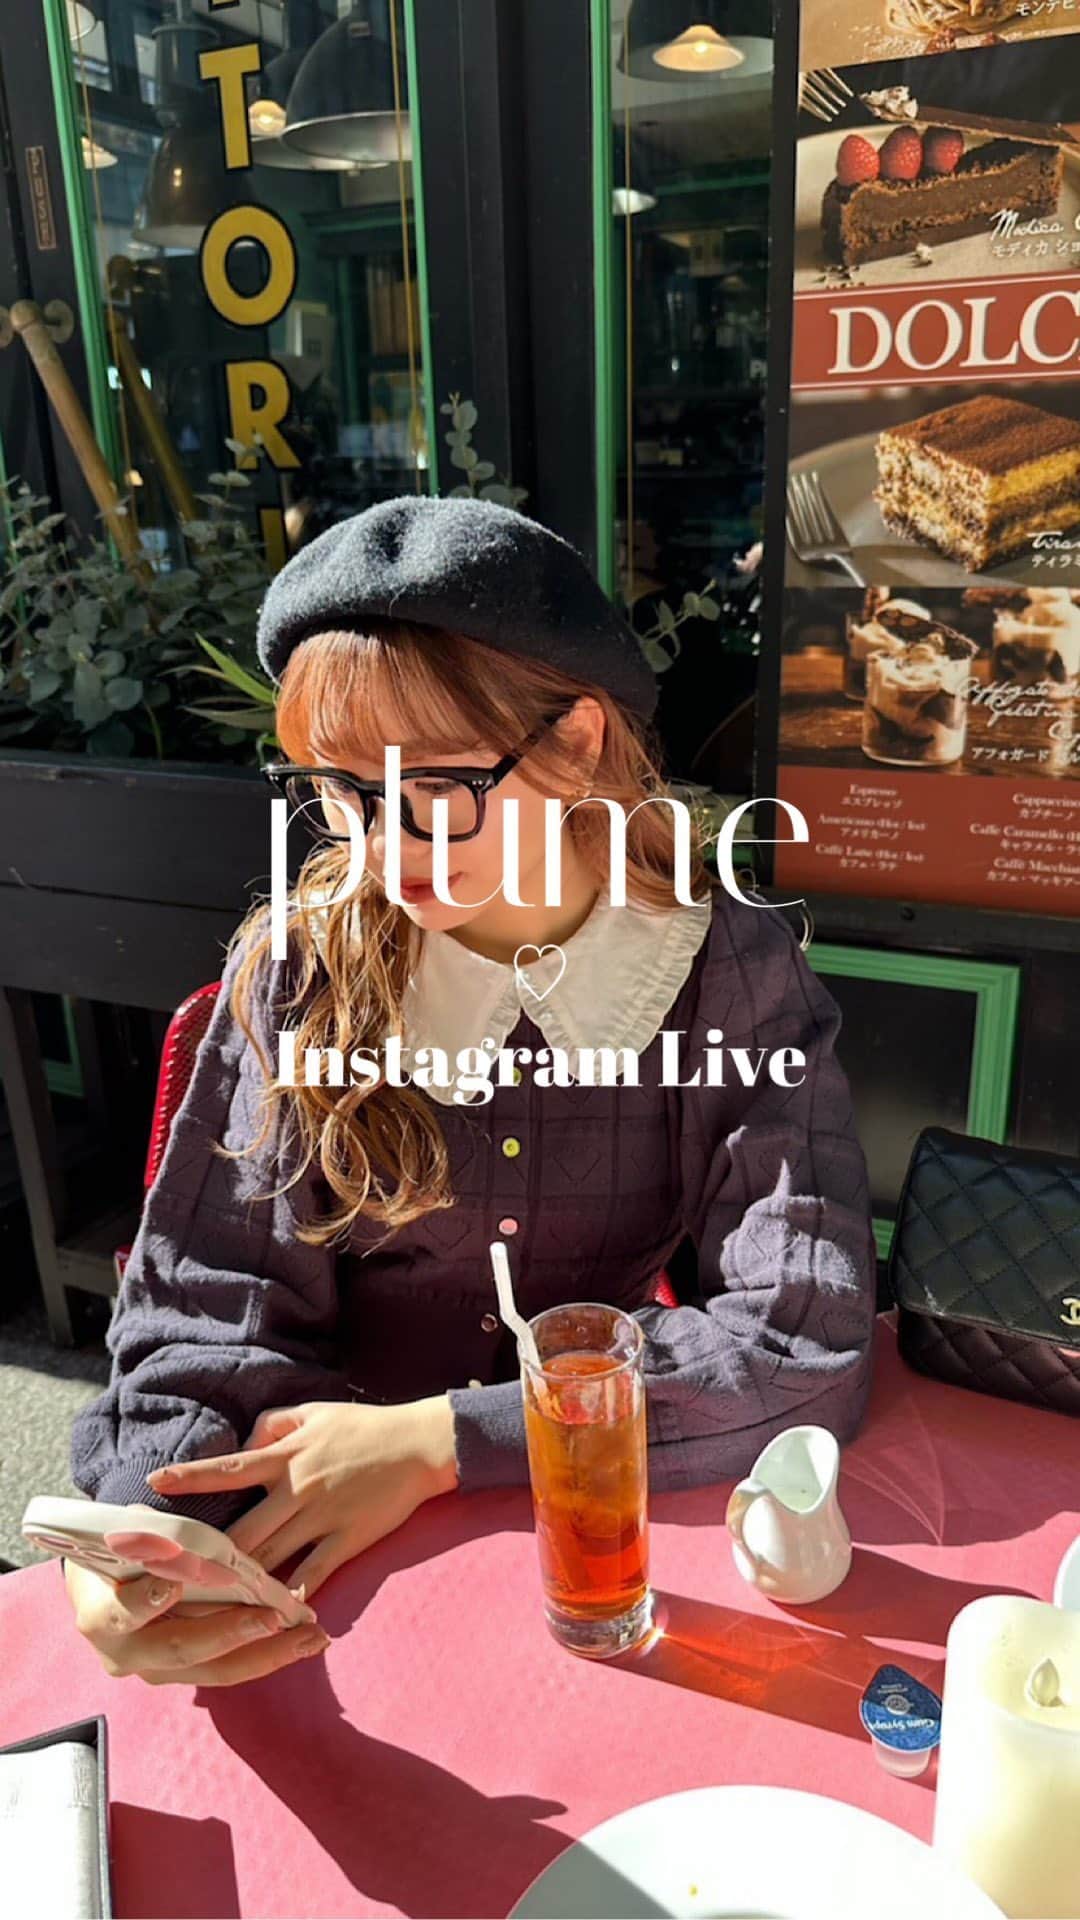 one after another NICECLAUPのインスタグラム：「ㅤㅤㅤㅤㅤㅤㅤㅤㅤㅤㅤㅤㅤ 公式通販サイト限定限定ブランド🎀 @plume__official  の新作紹介❄️  12/2 sat. 21:00〜 予約開始📣」